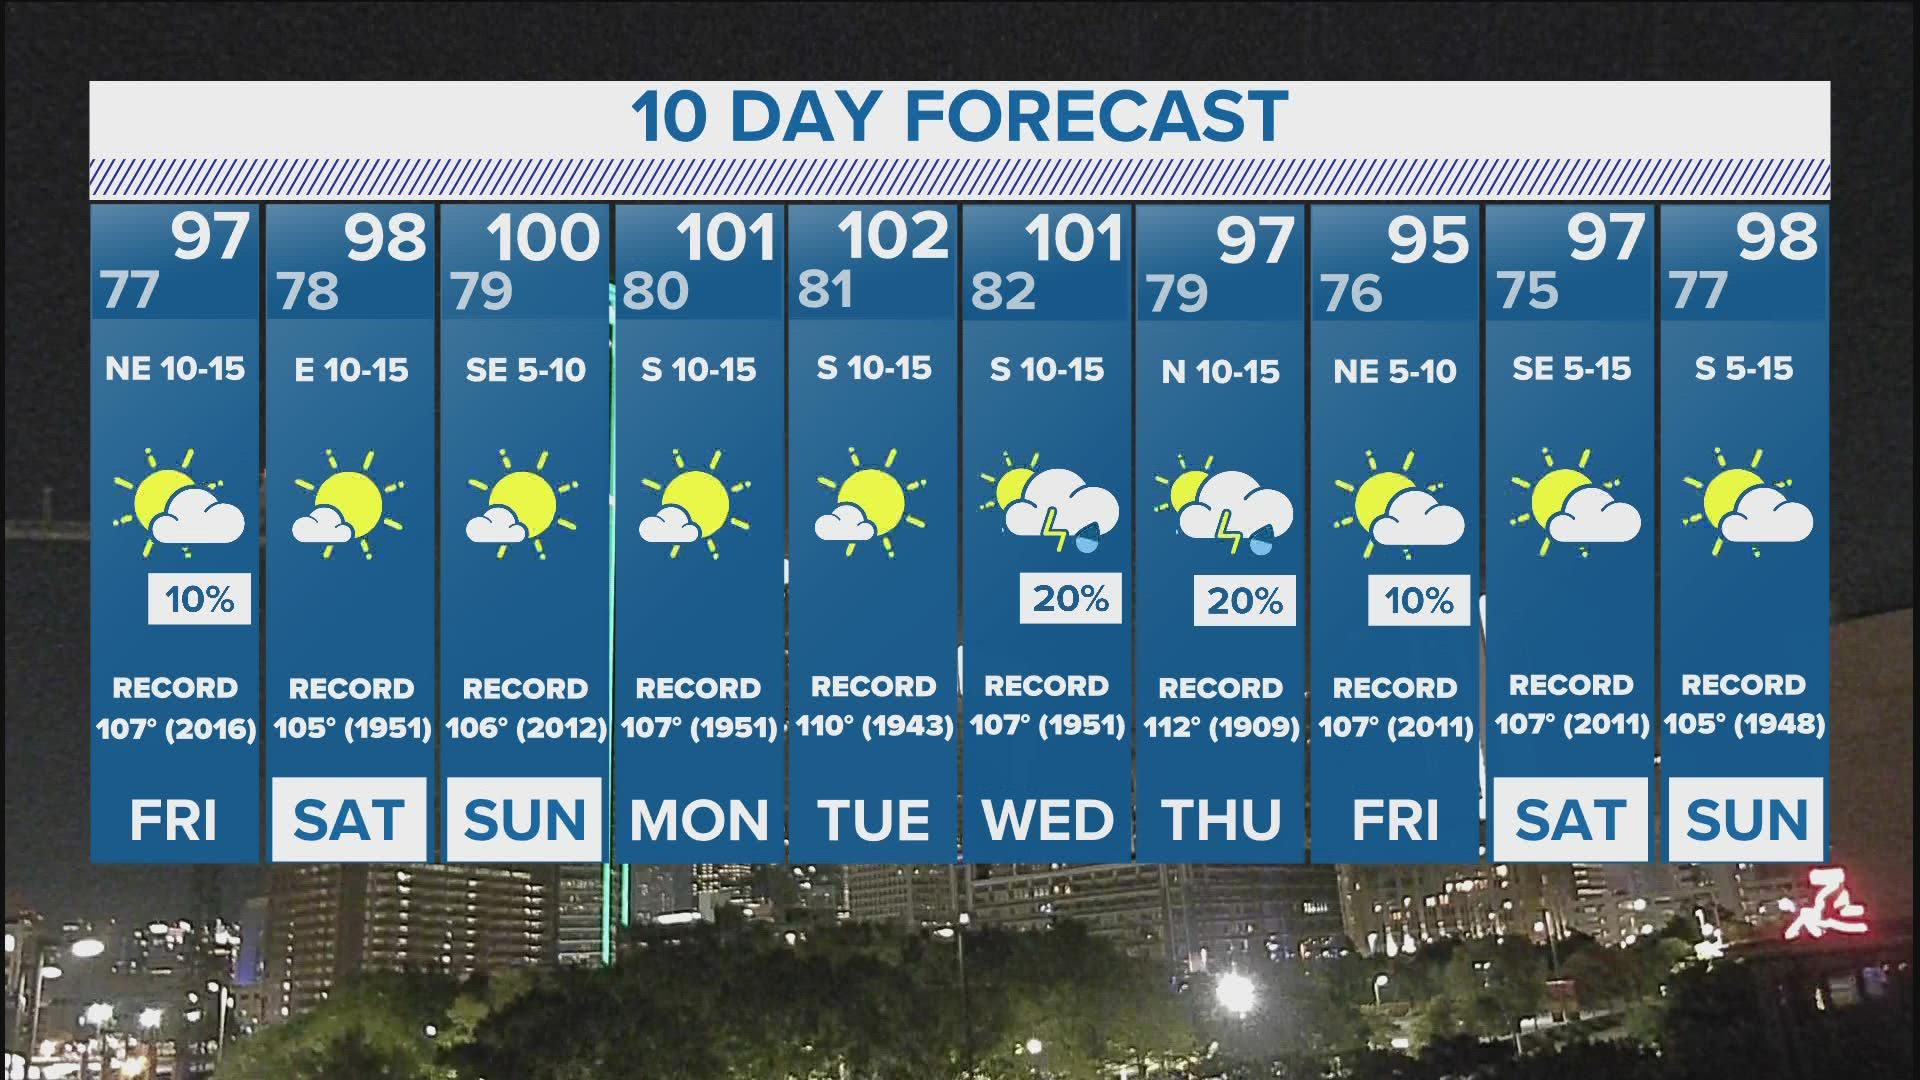 North Texas looks to stay under 100 degrees heading into the weekend.